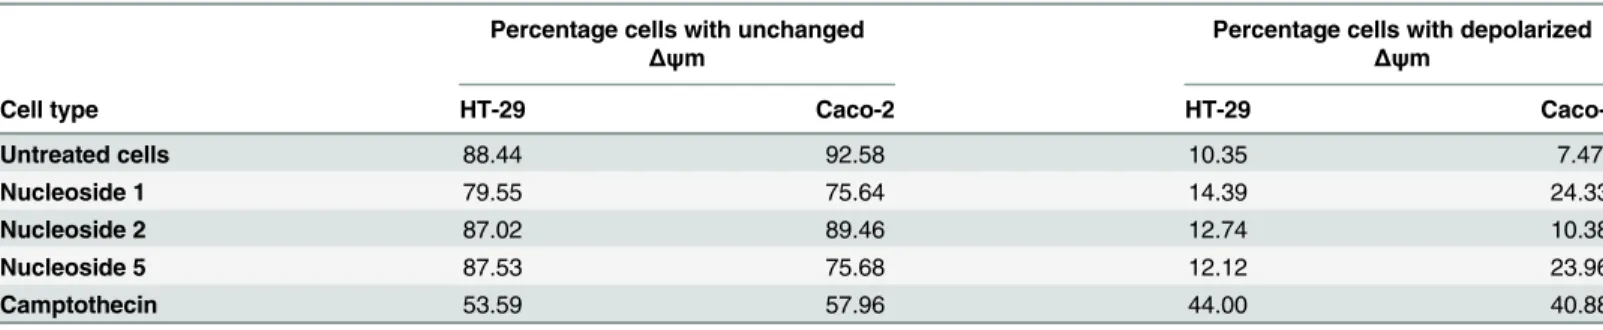 Table 1. Summary of the mitochondrial membrane potential change induced by the nucleoside analogues and camptothecin in the HT-29 and Caco-2 colon cancer cell lines.